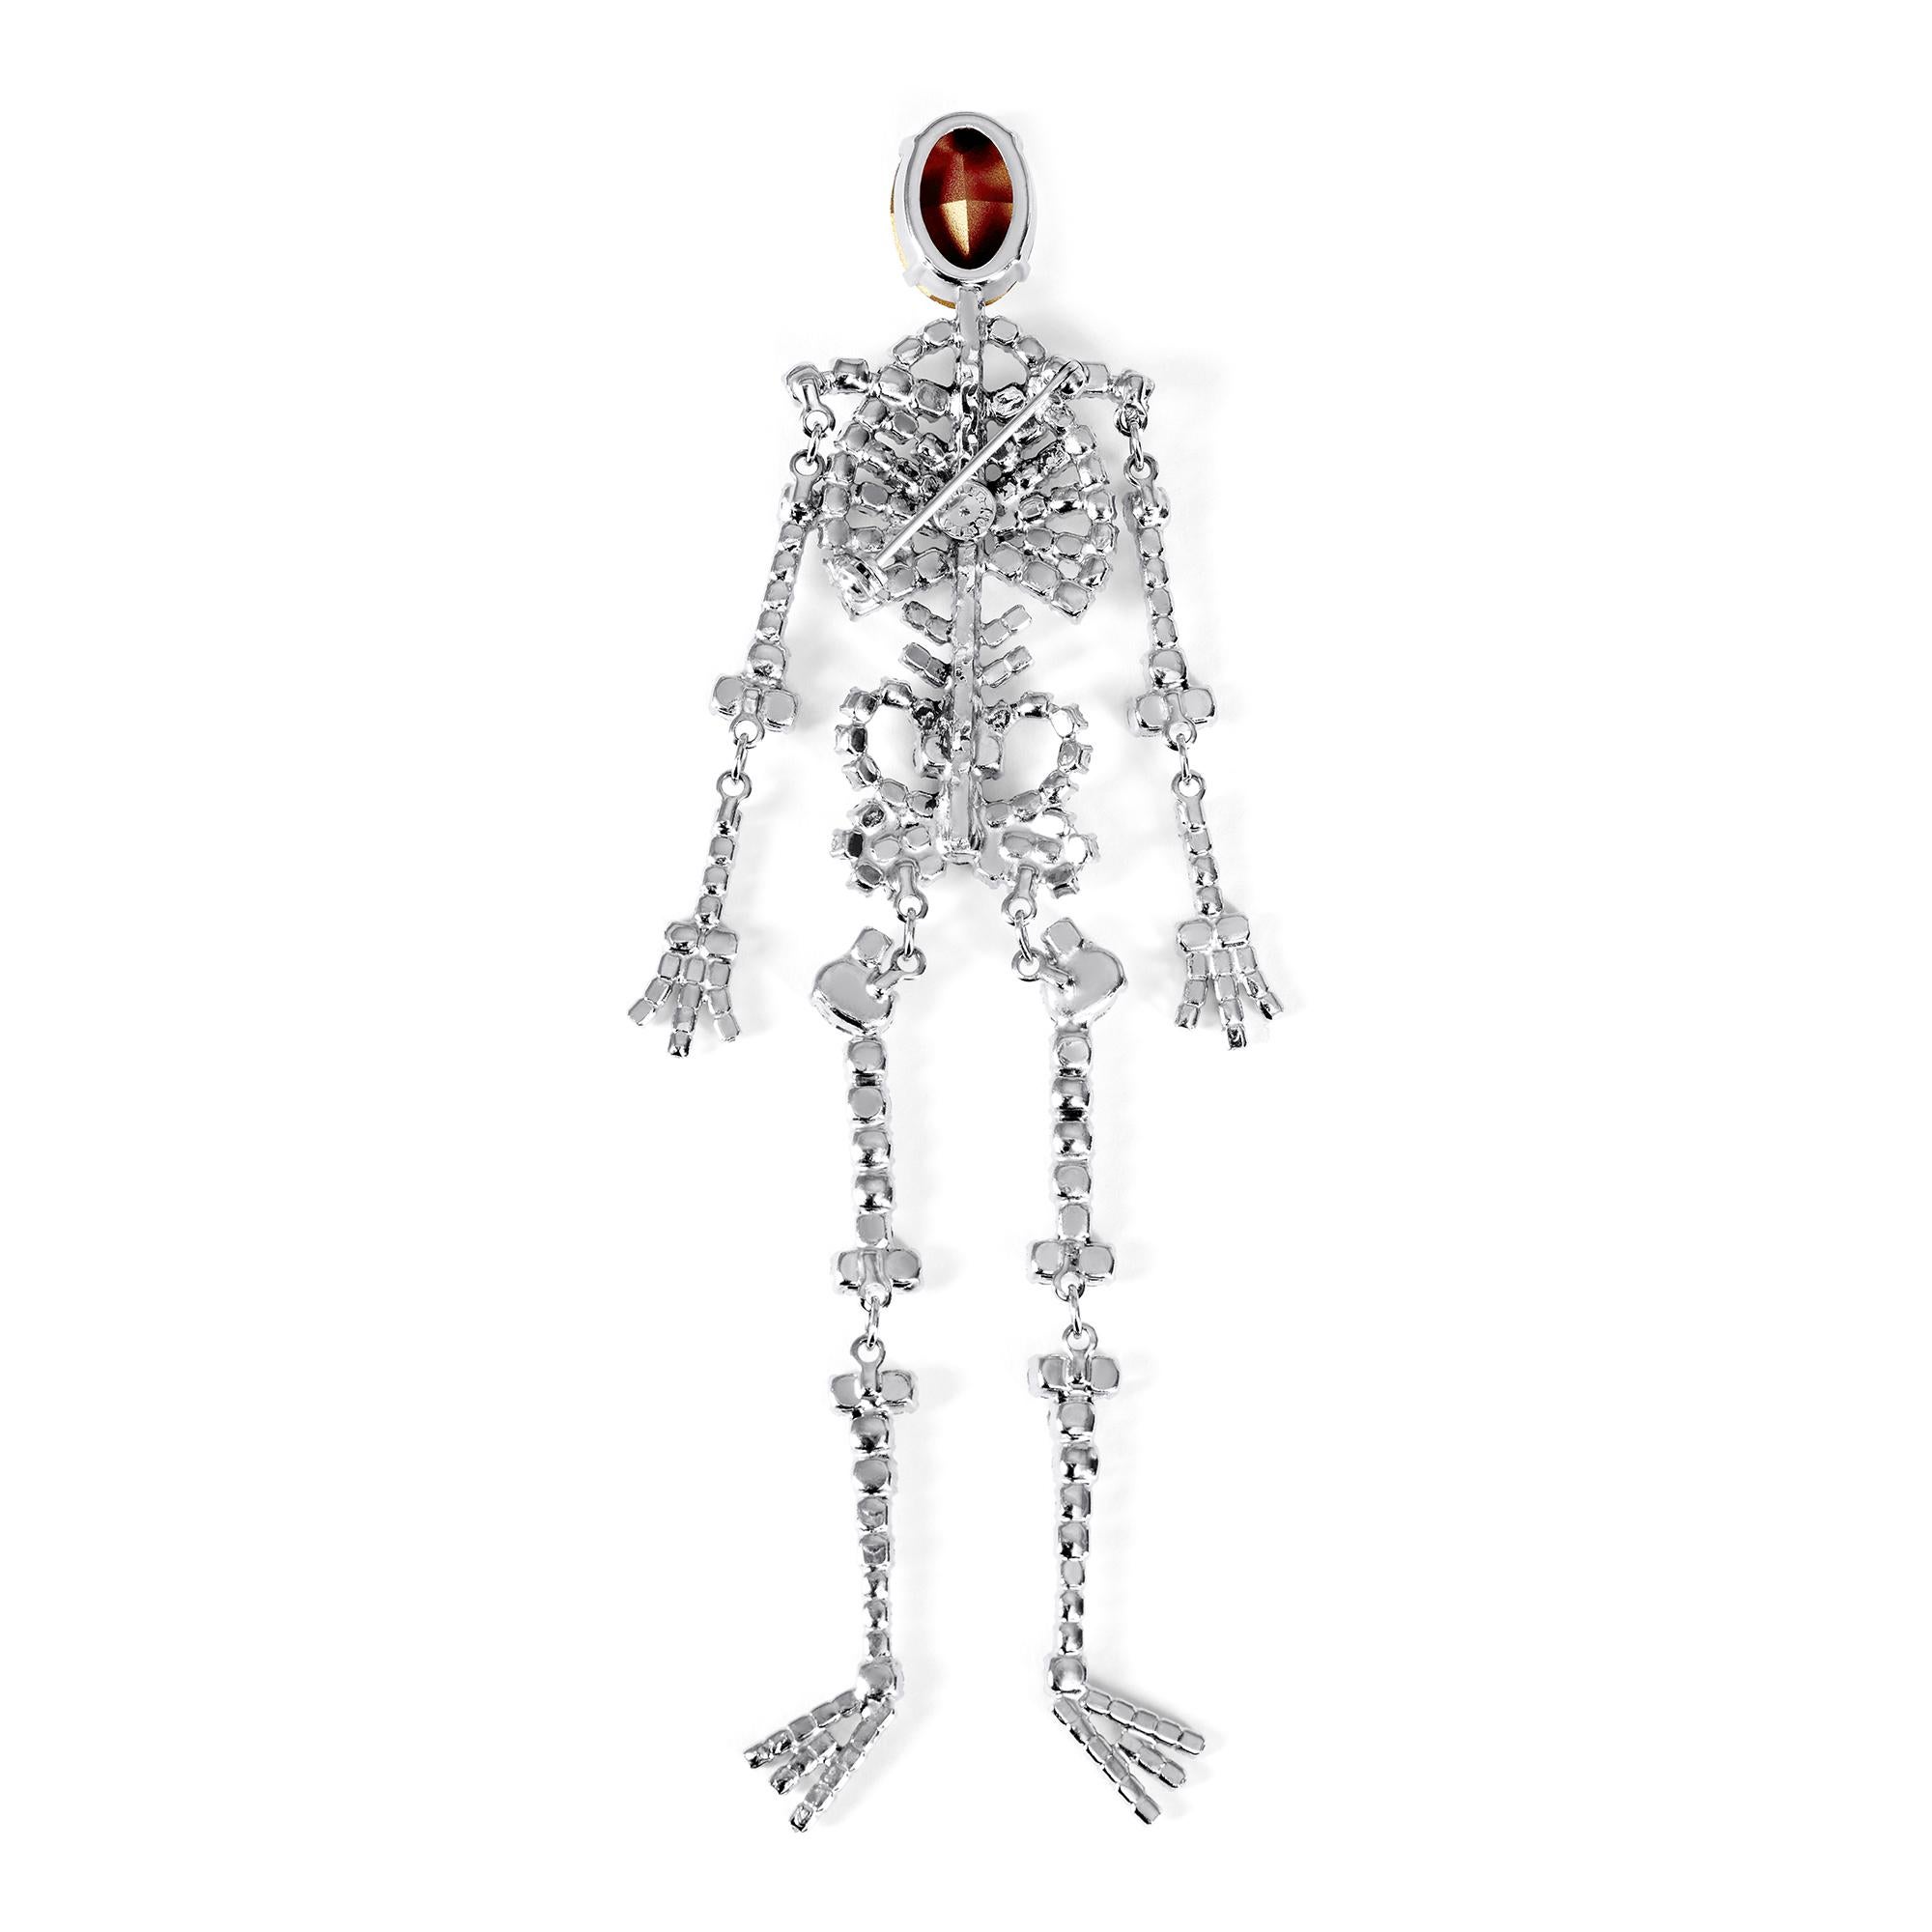 This magnificent original 1980s diamanté skeleton design pin brooch is by celebrated British costume jewellery designers Butler & Wilson (see notes) and is in impeccable vintage condition.  Over 15 cm long, it is a very sizeable statement piece. The